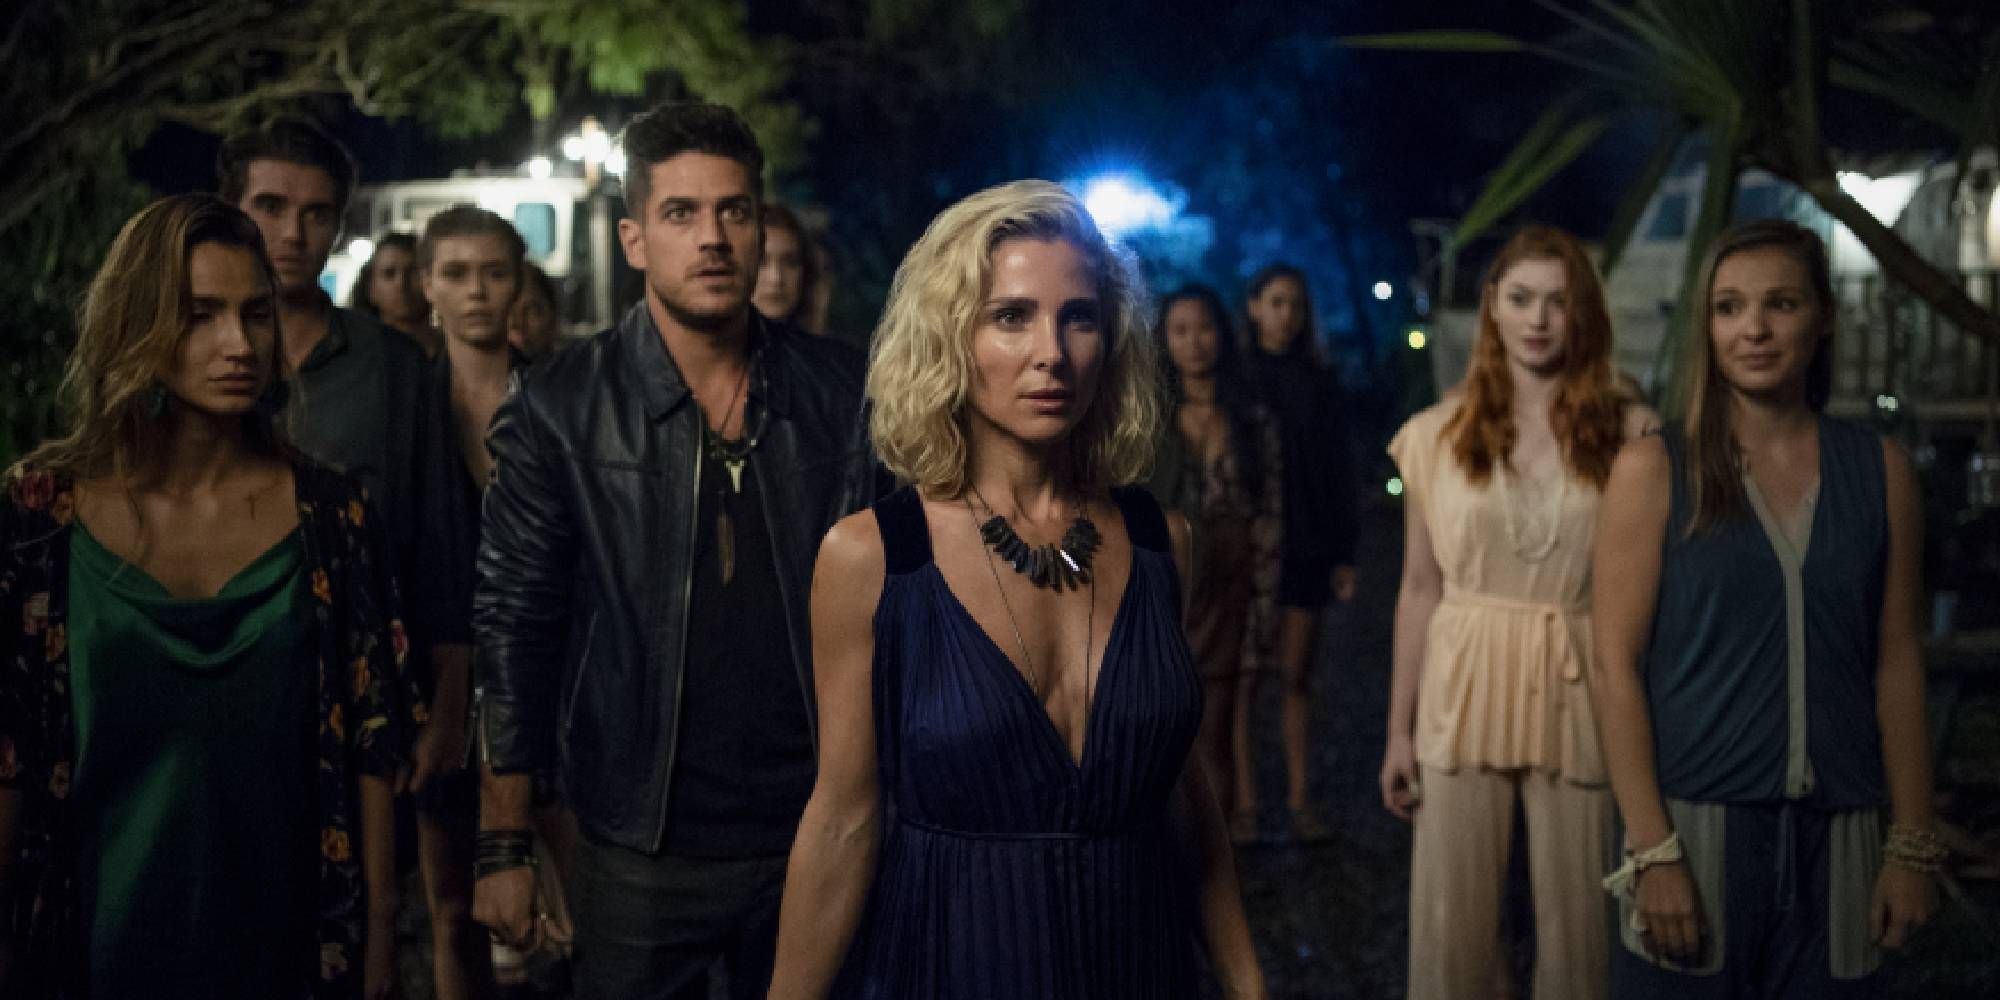 Elsa Pataky in Tidelands surrounded by other characters.